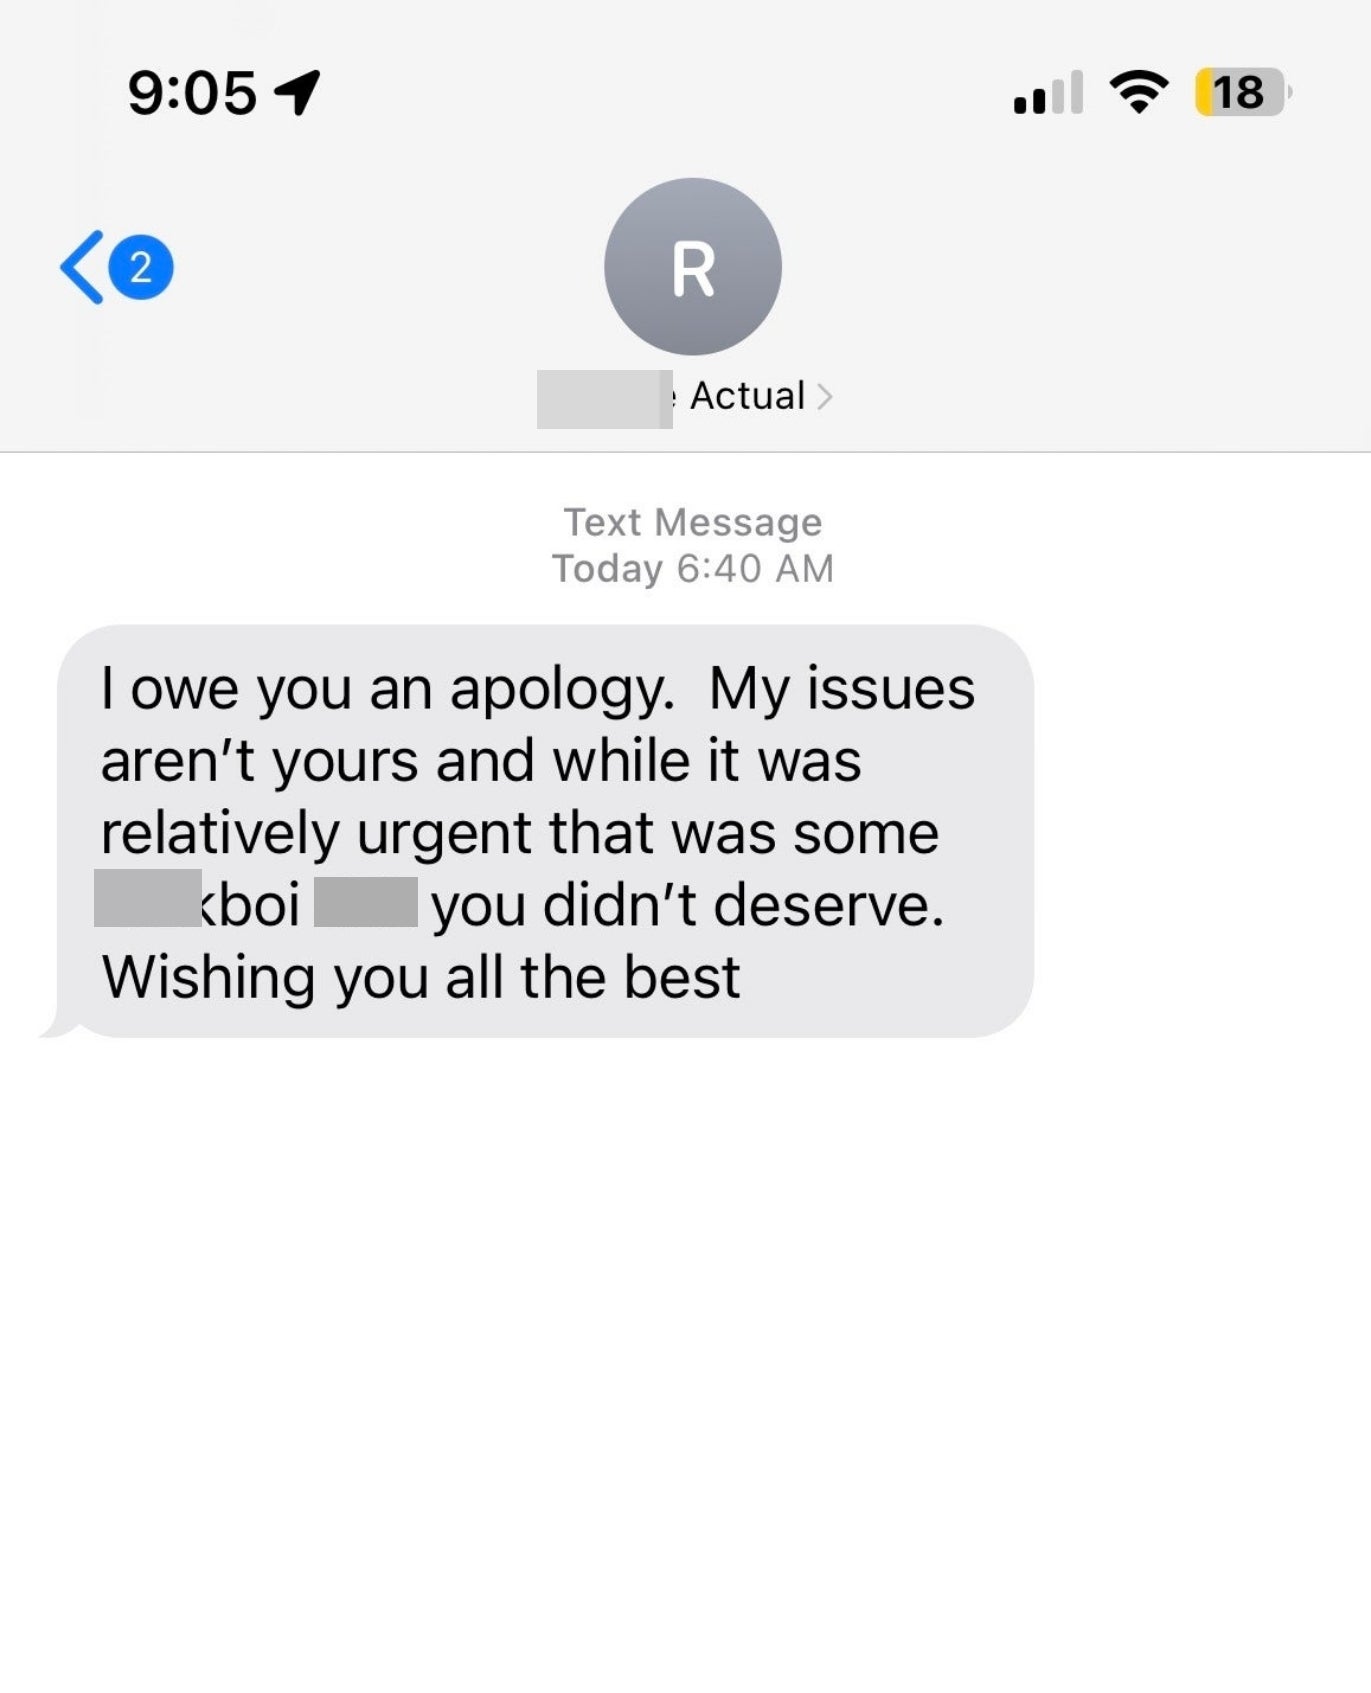 &quot;I owe you an apology. My issues aren&#x27;t yours and while it was relatively urgent that was some fuckboi shit you didn&#x27;t deserve. Wishing you all the best.&quot;